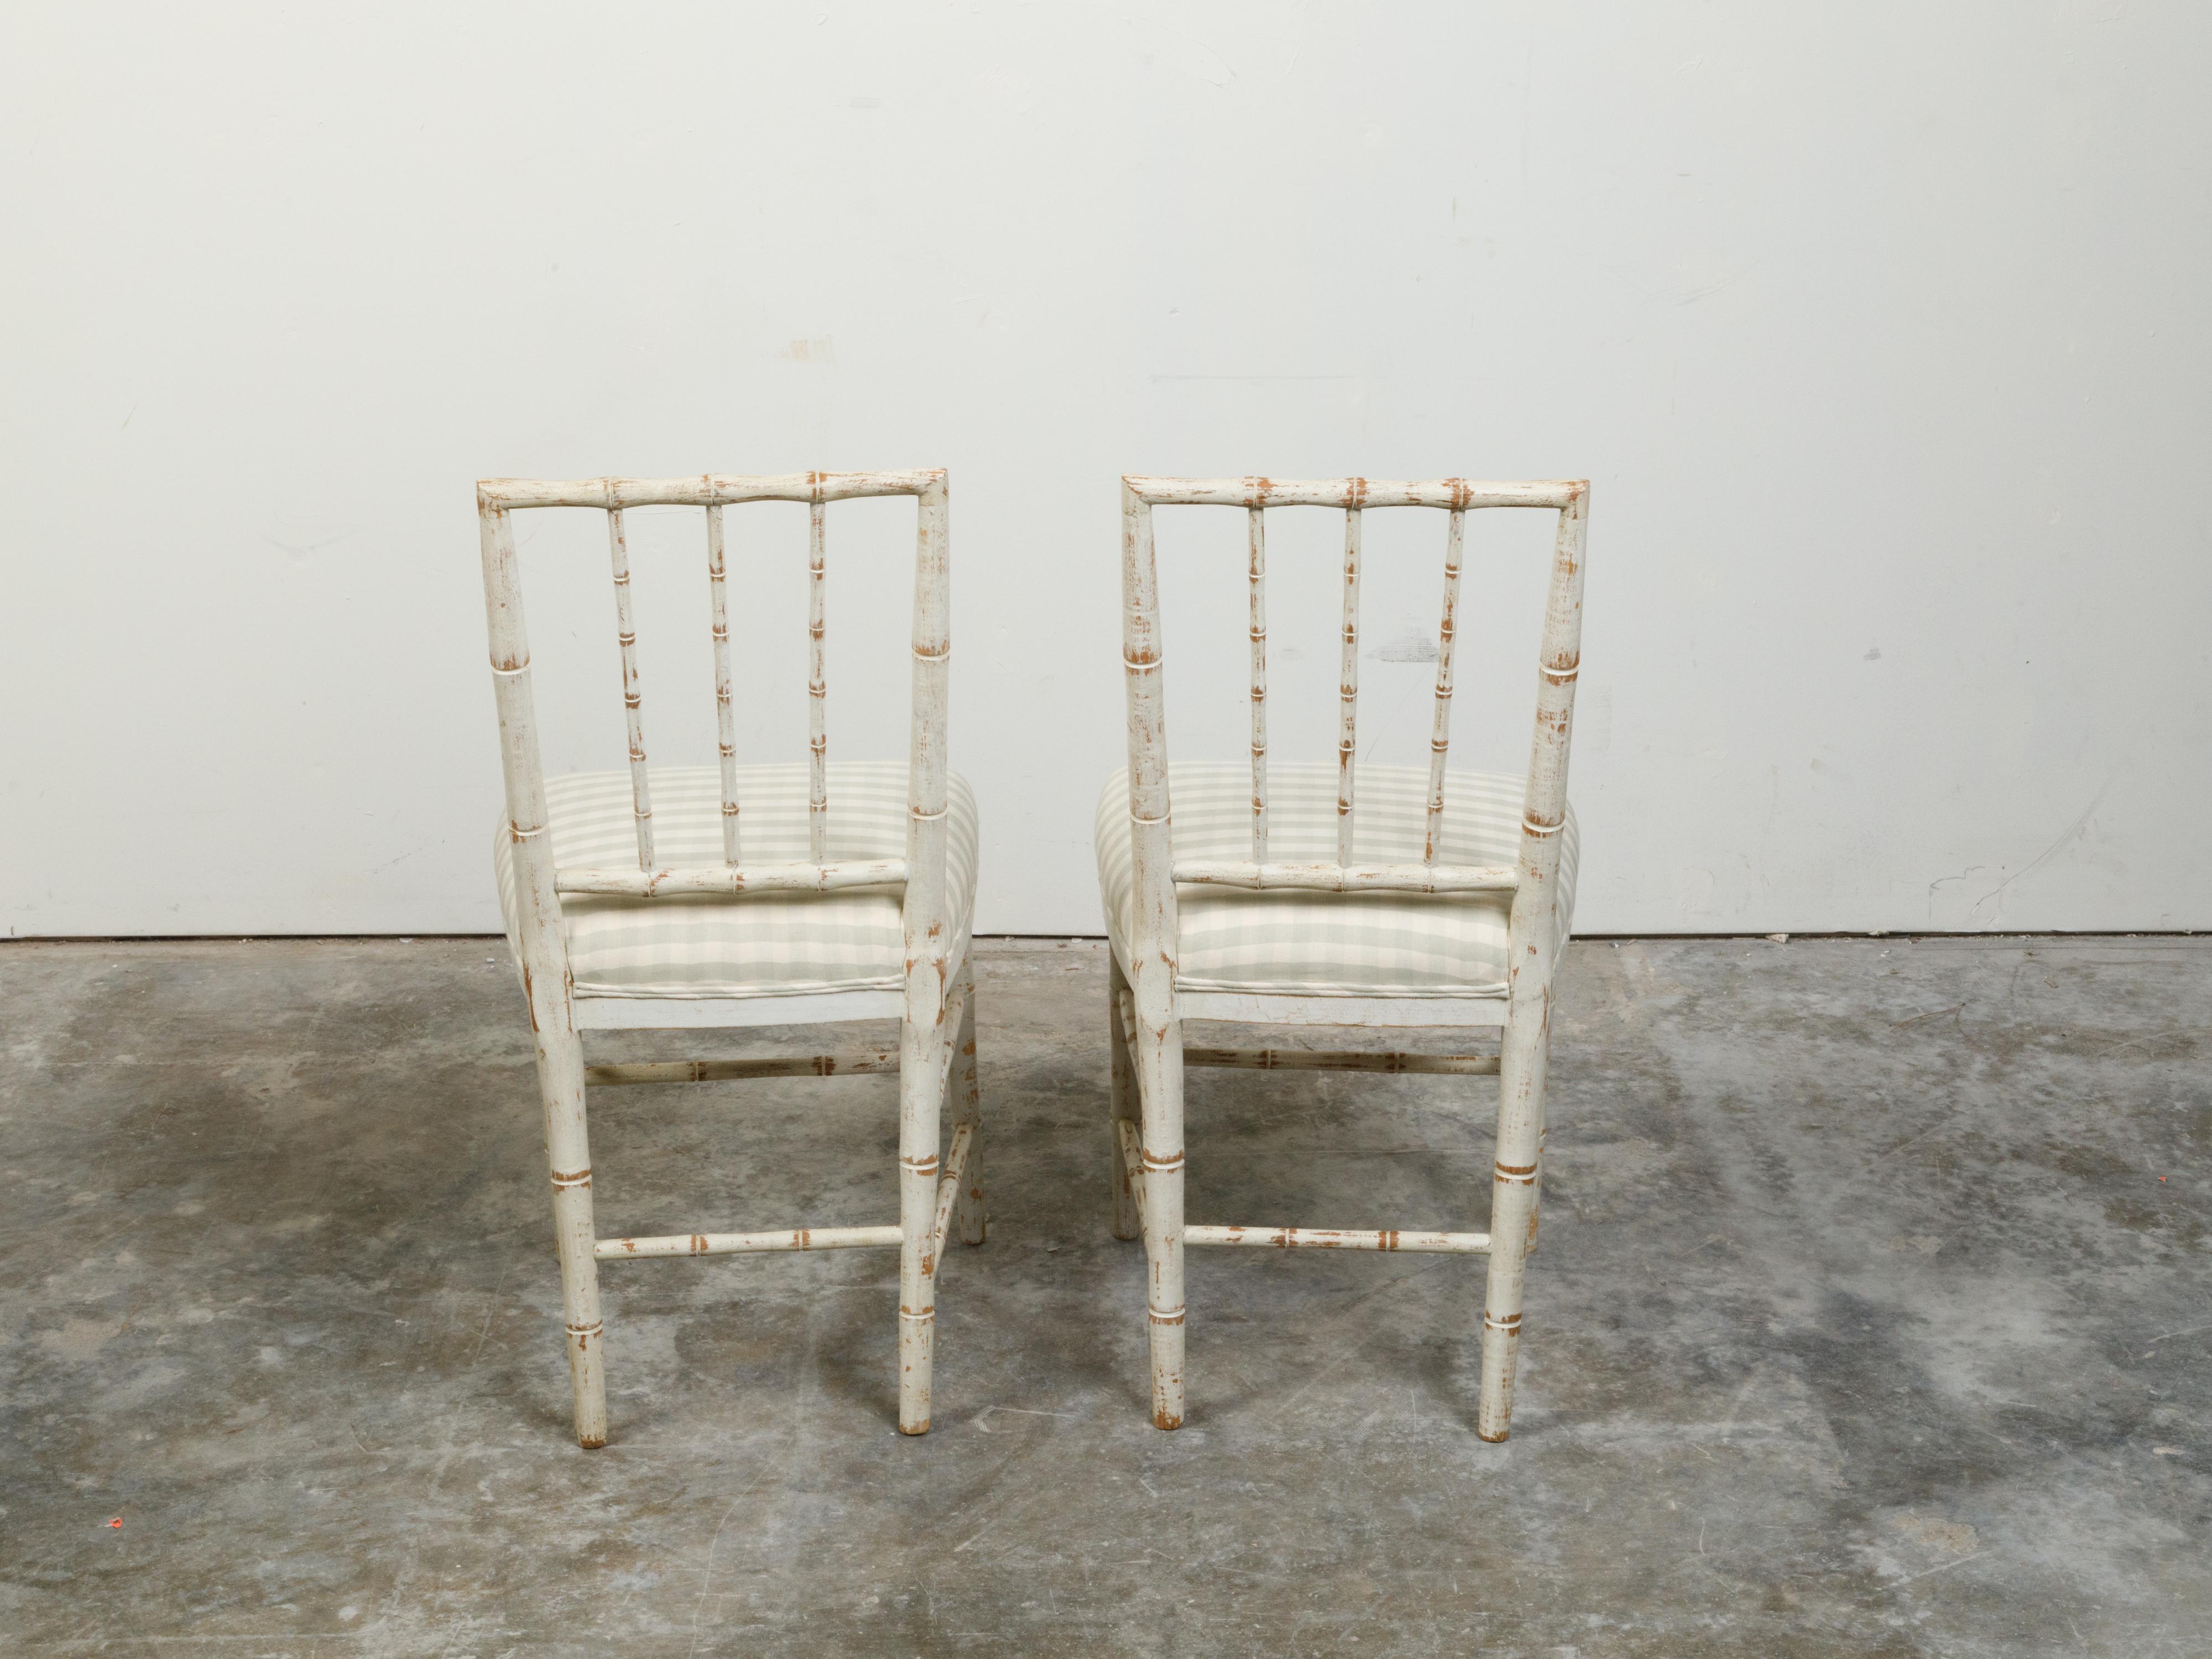 Pair of French Midcentury Faux Bamboo Side Chairs with Distressed Patina In Good Condition For Sale In Atlanta, GA